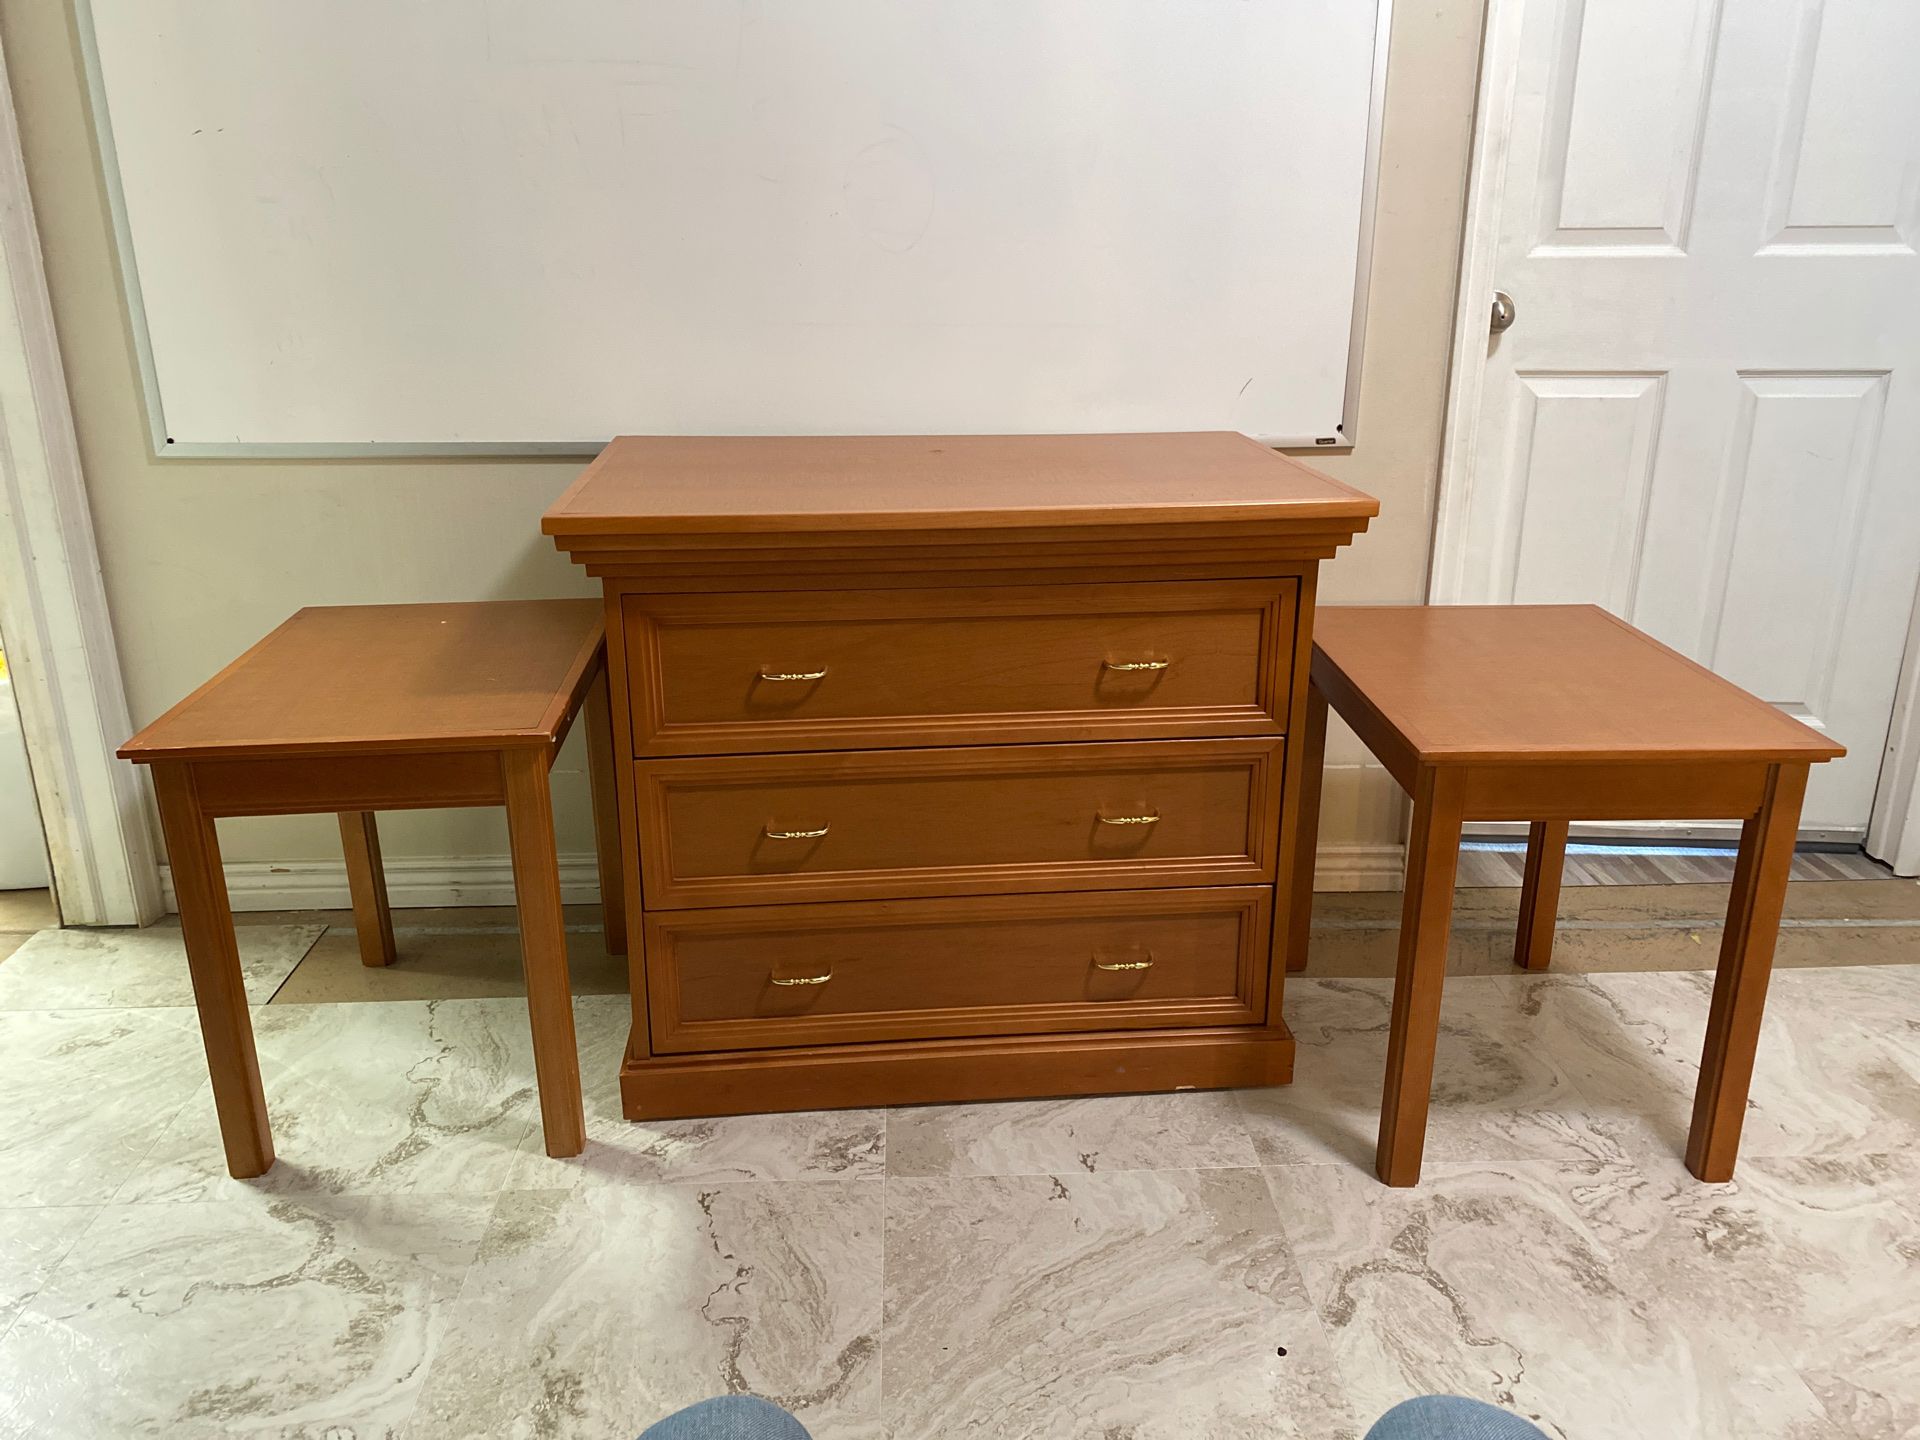 3 door dresser and 2 end tables FREE!!!